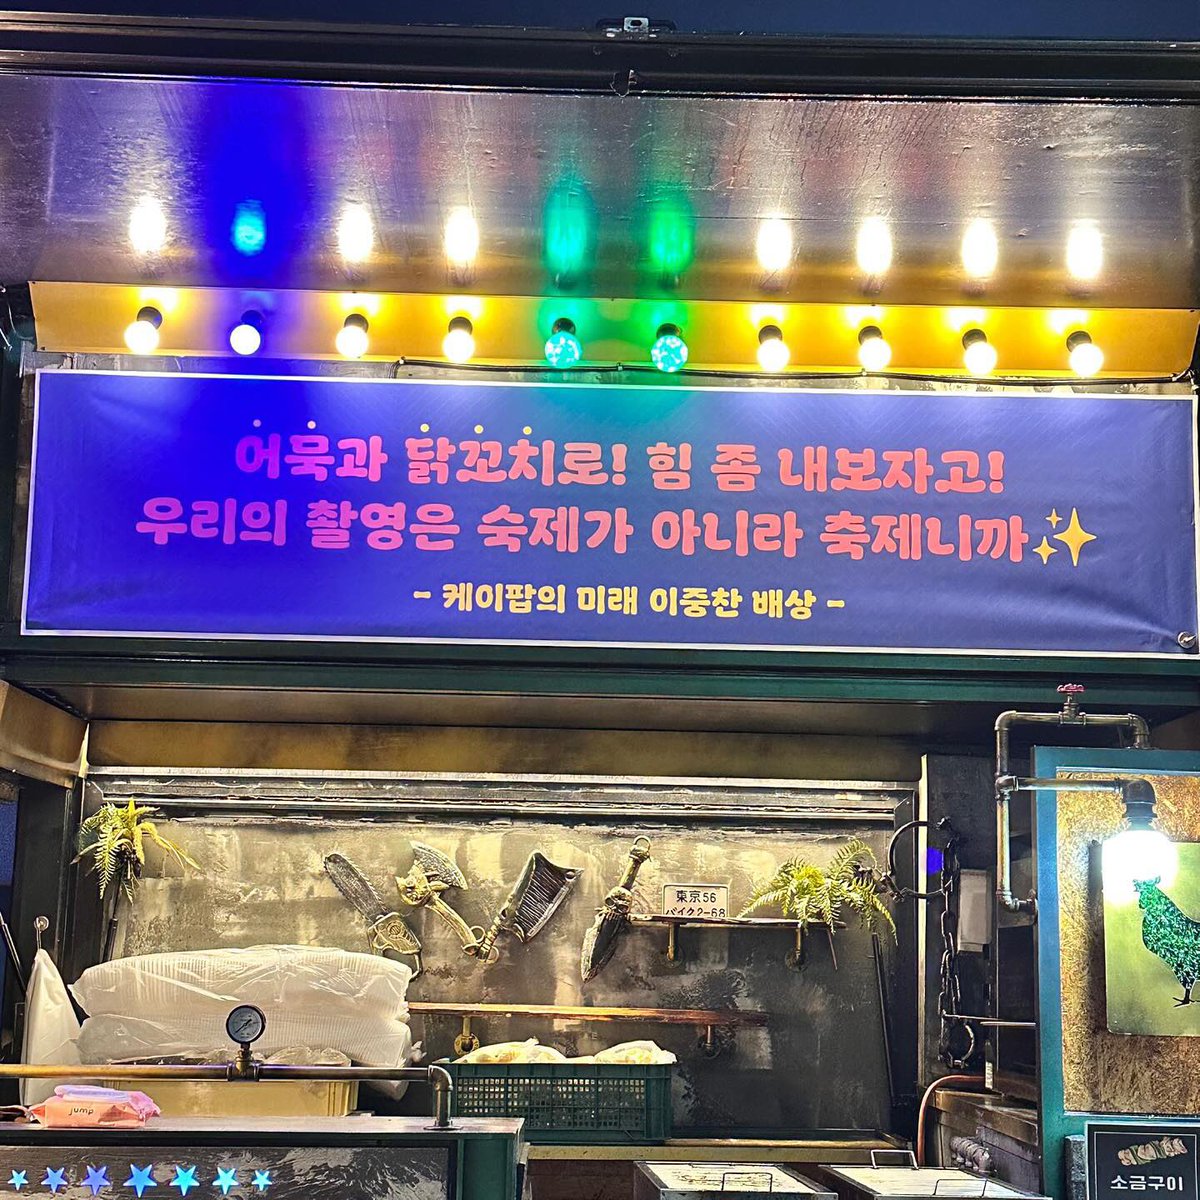 lrt waaah dino sent a coffee truck during SPELL mv filming 🥹💞 

the cute '나야 디노!“ (it's me, dino!) and the otter pic beside it 😭 shsjsj then the pi cheolin pics on the other banners 😆